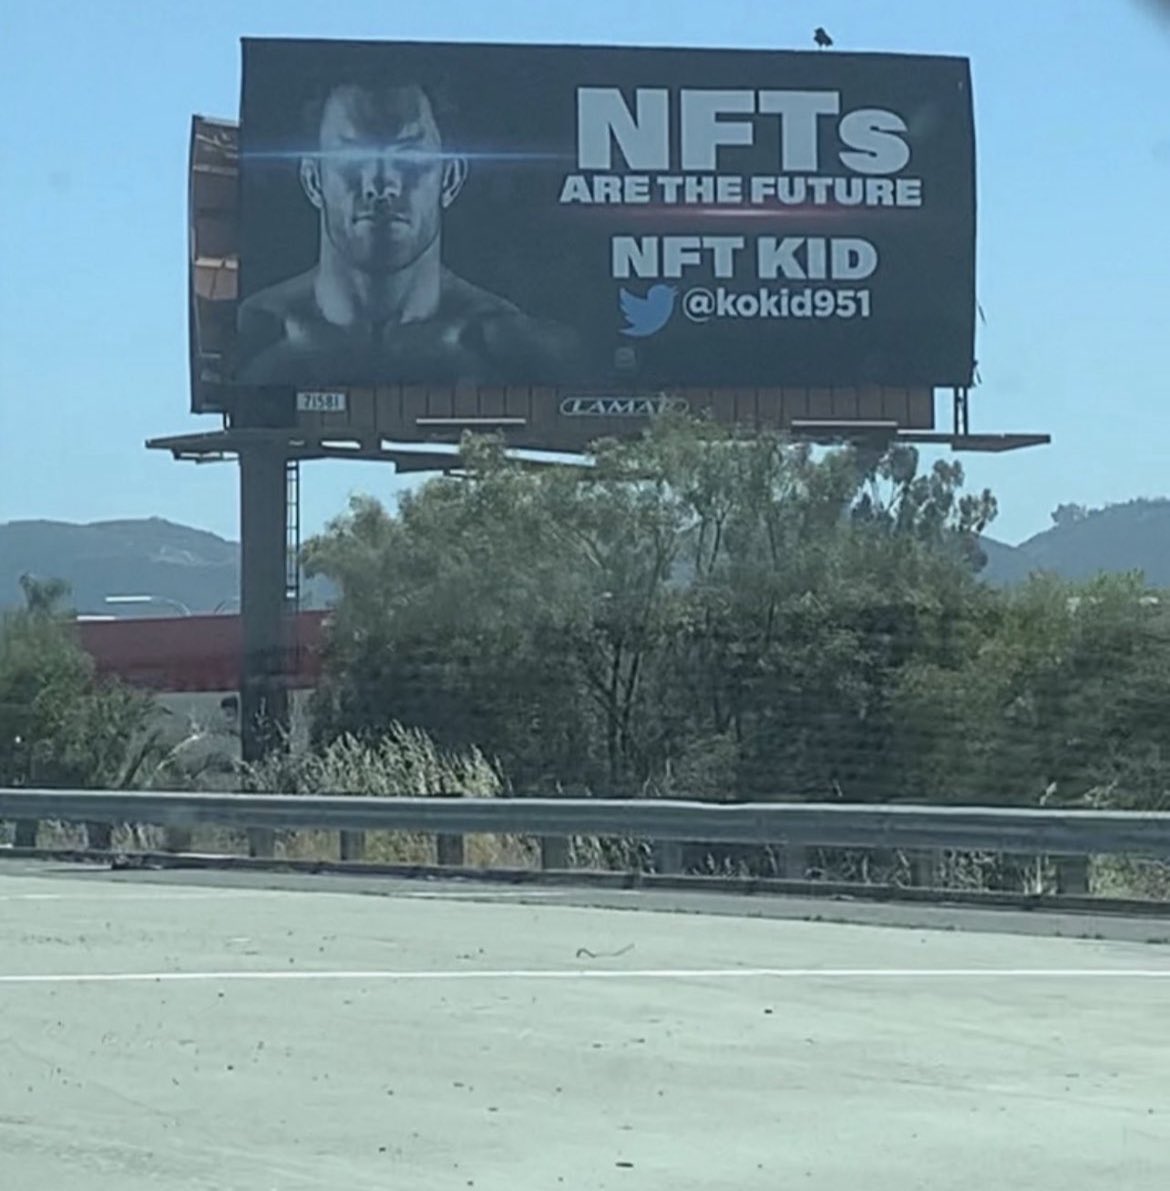 NFTs are the Future GM ☀️☀️☀️ Say it back if you believe #NFTkid